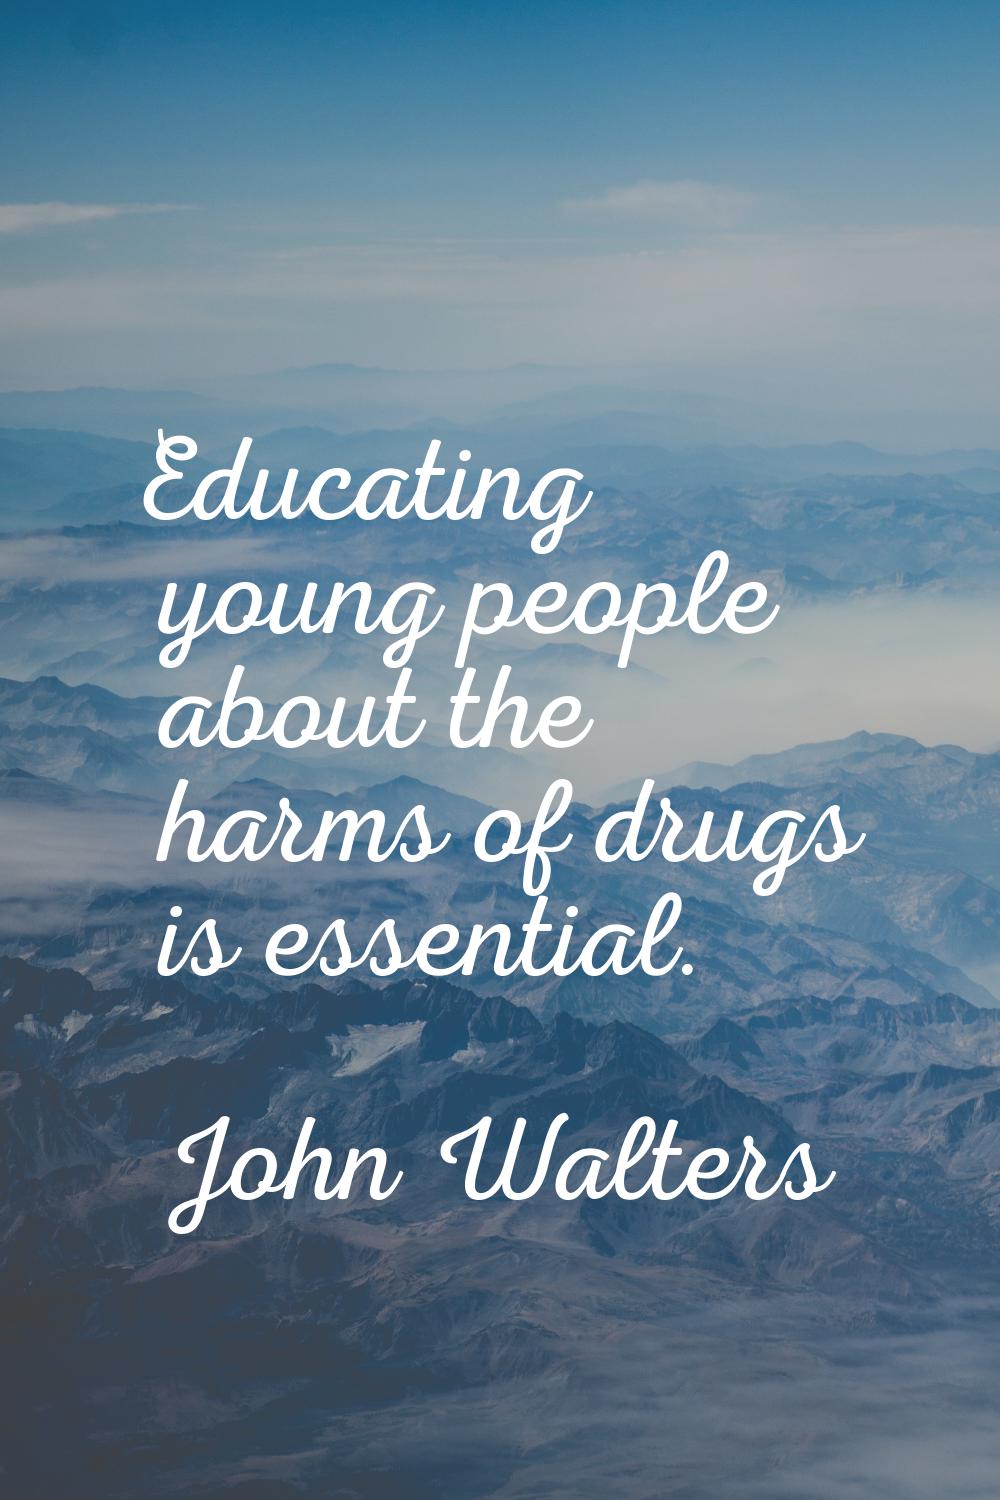 Educating young people about the harms of drugs is essential.